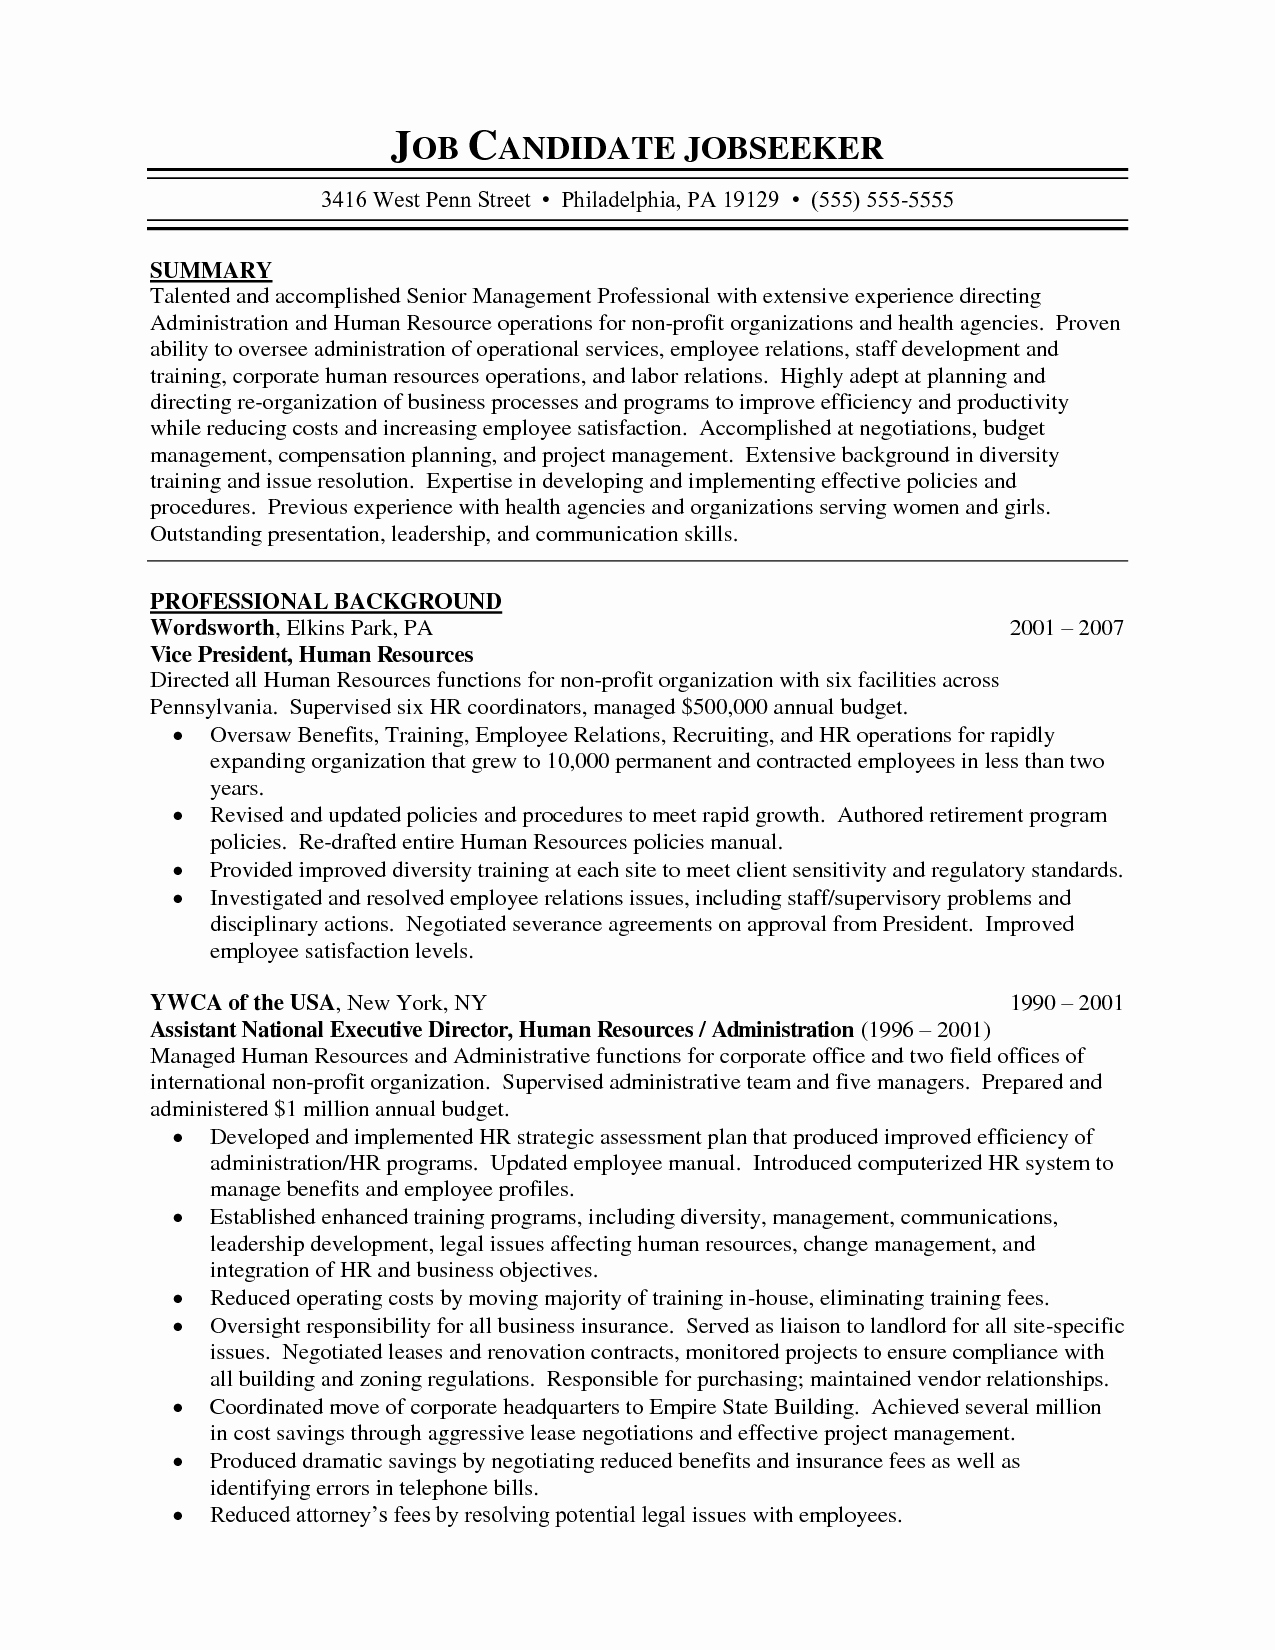 Entry Level Actuary Resume Beautiful Actuarial Analyst Cover Letter Entry Level Financial solutions Internship Example Corporate